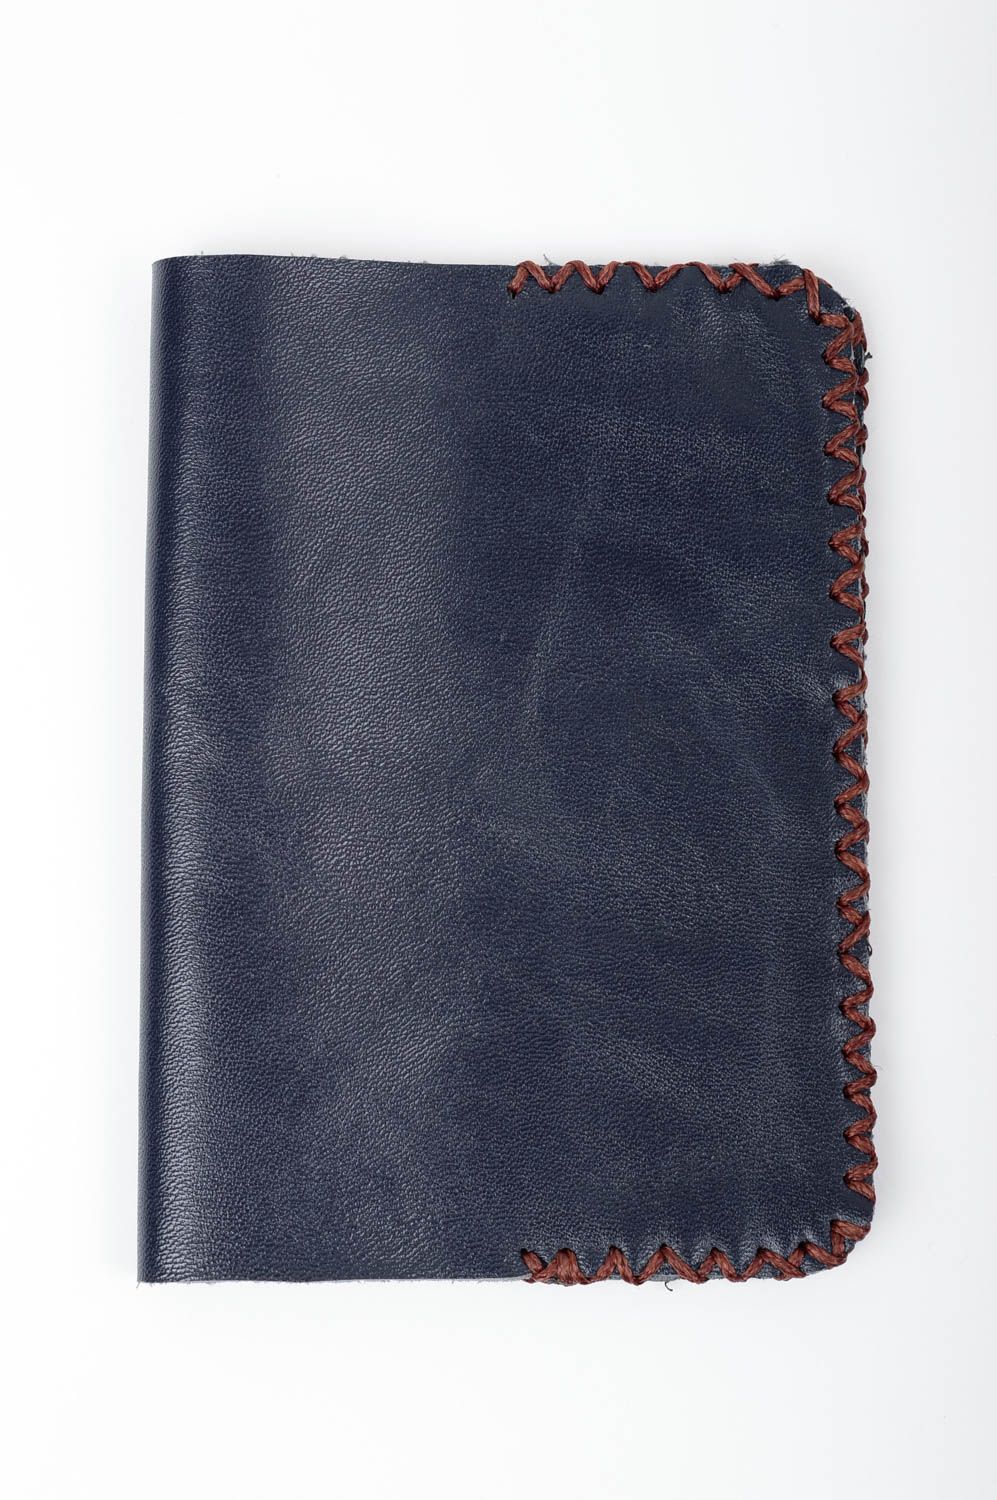 Beautiful handmade leather passport cover leather goods fashion accessories photo 1